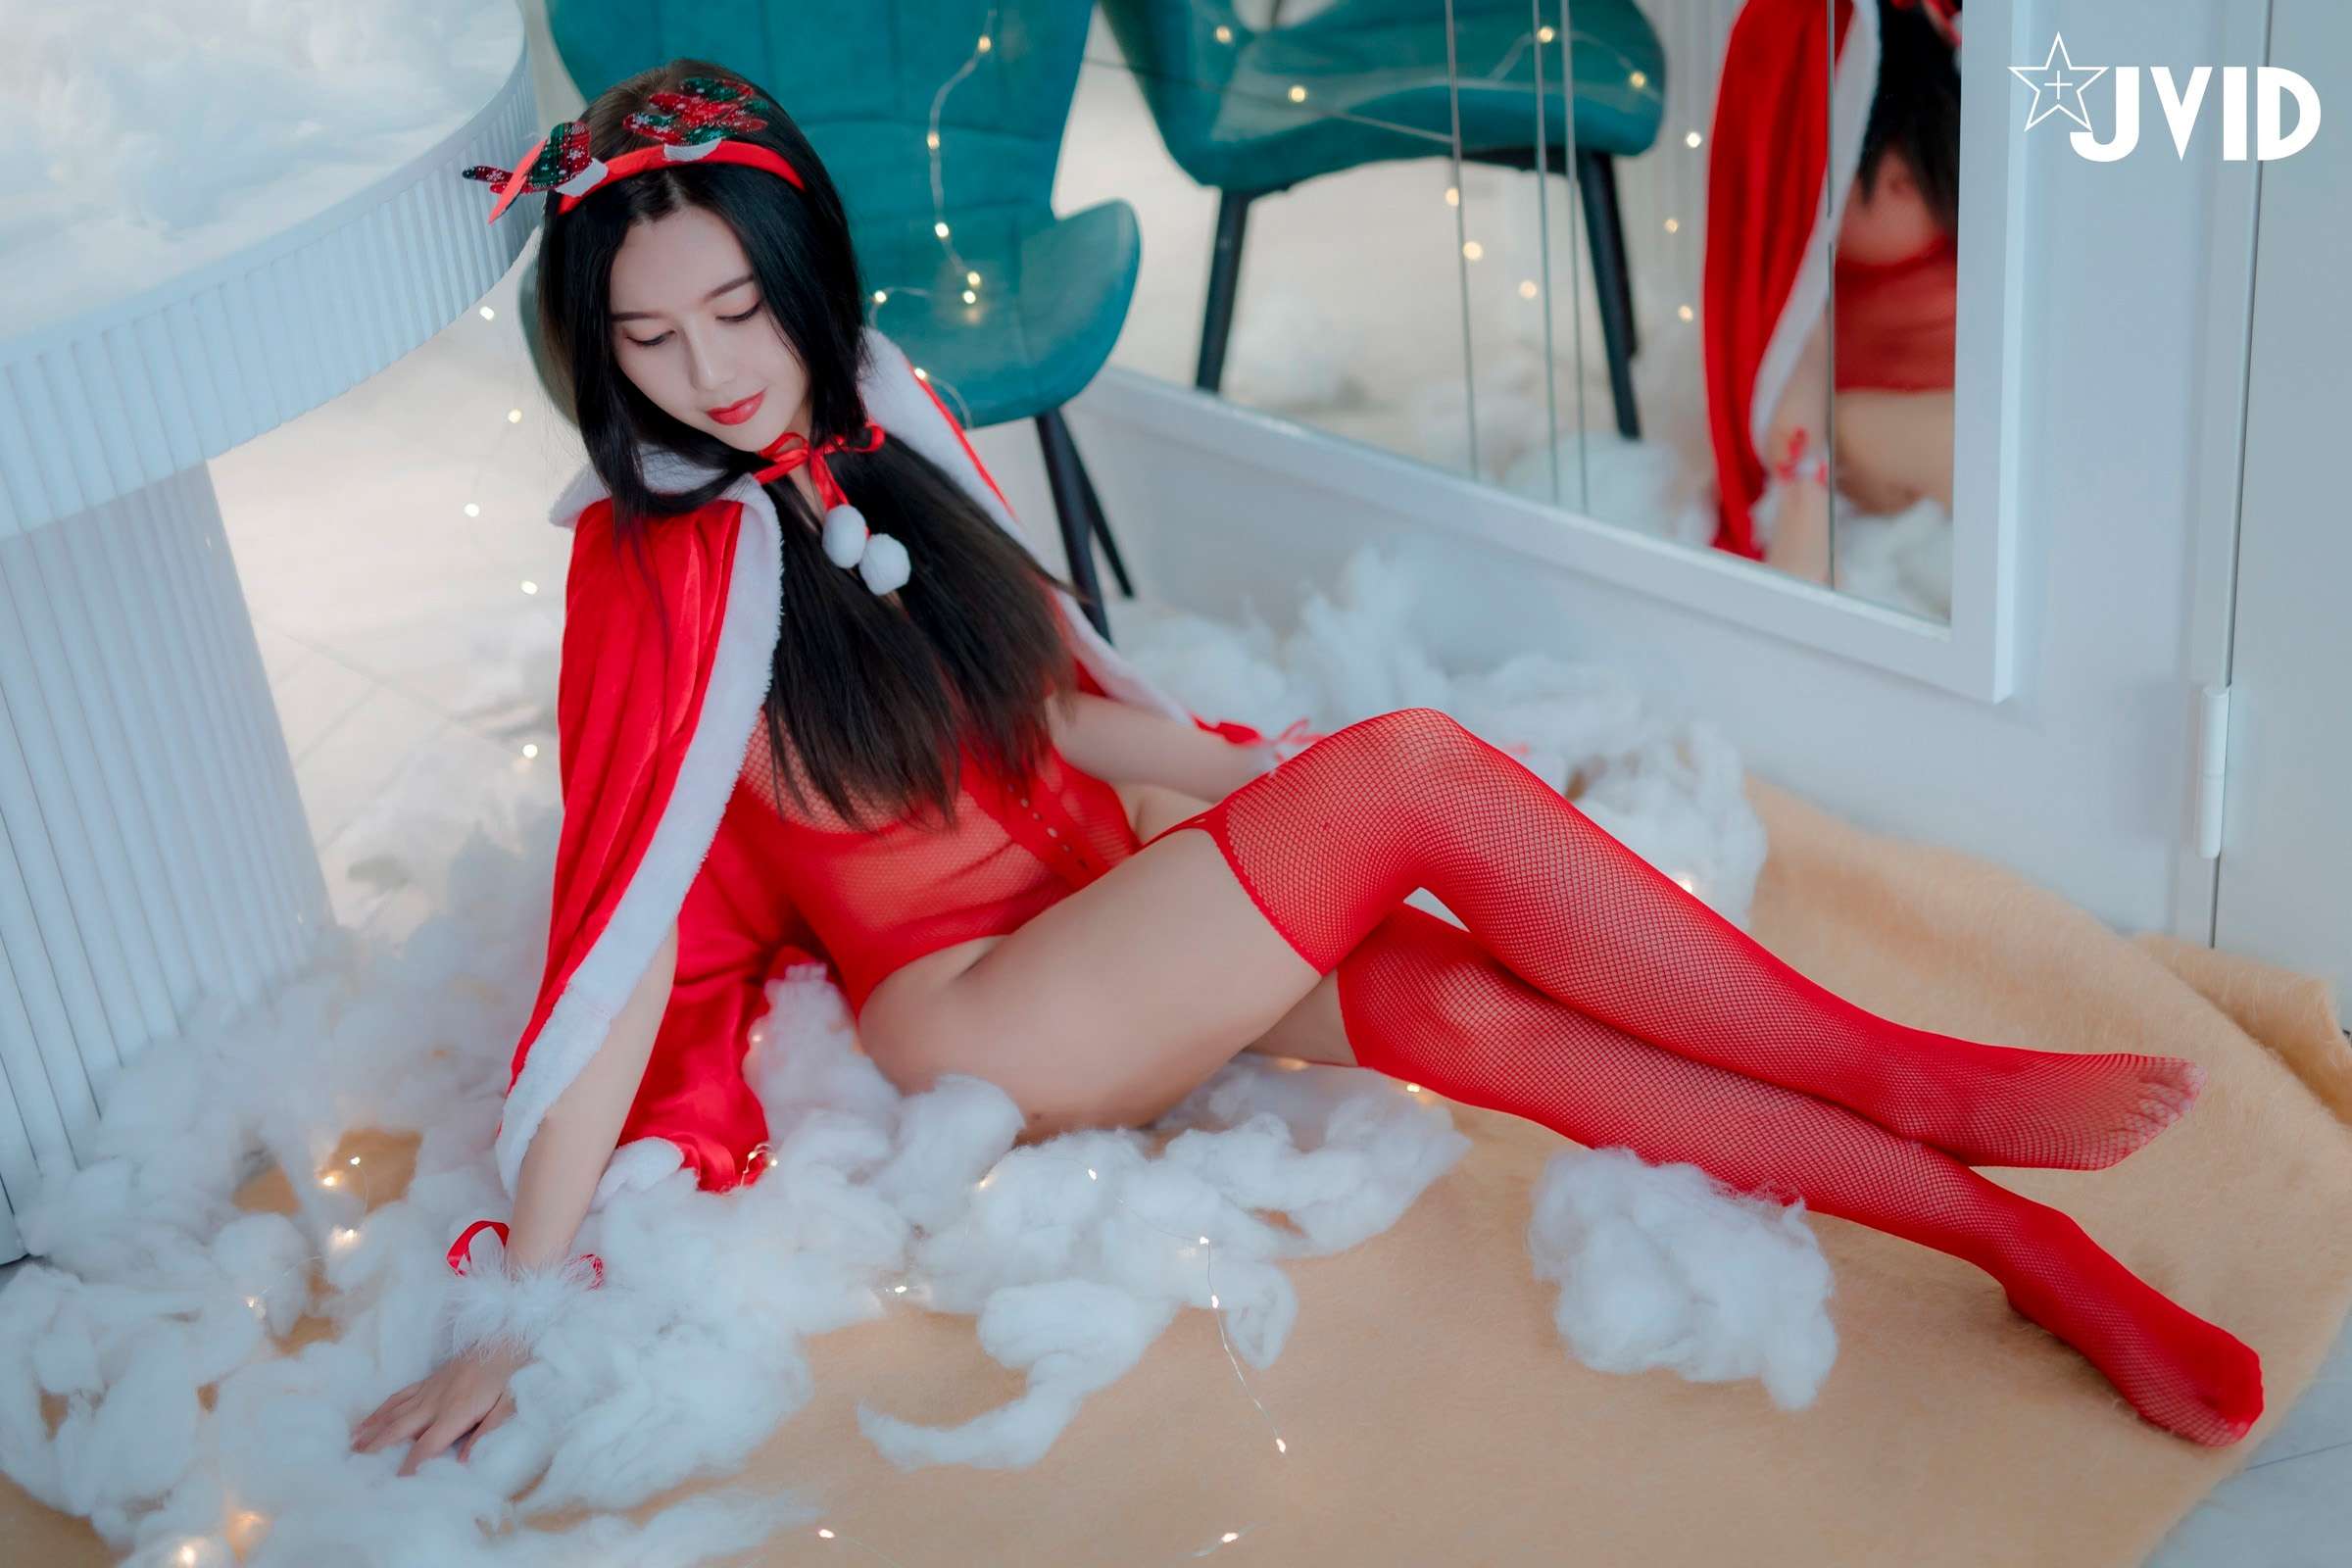 [JVID] Sexy Christmas party - 木木森